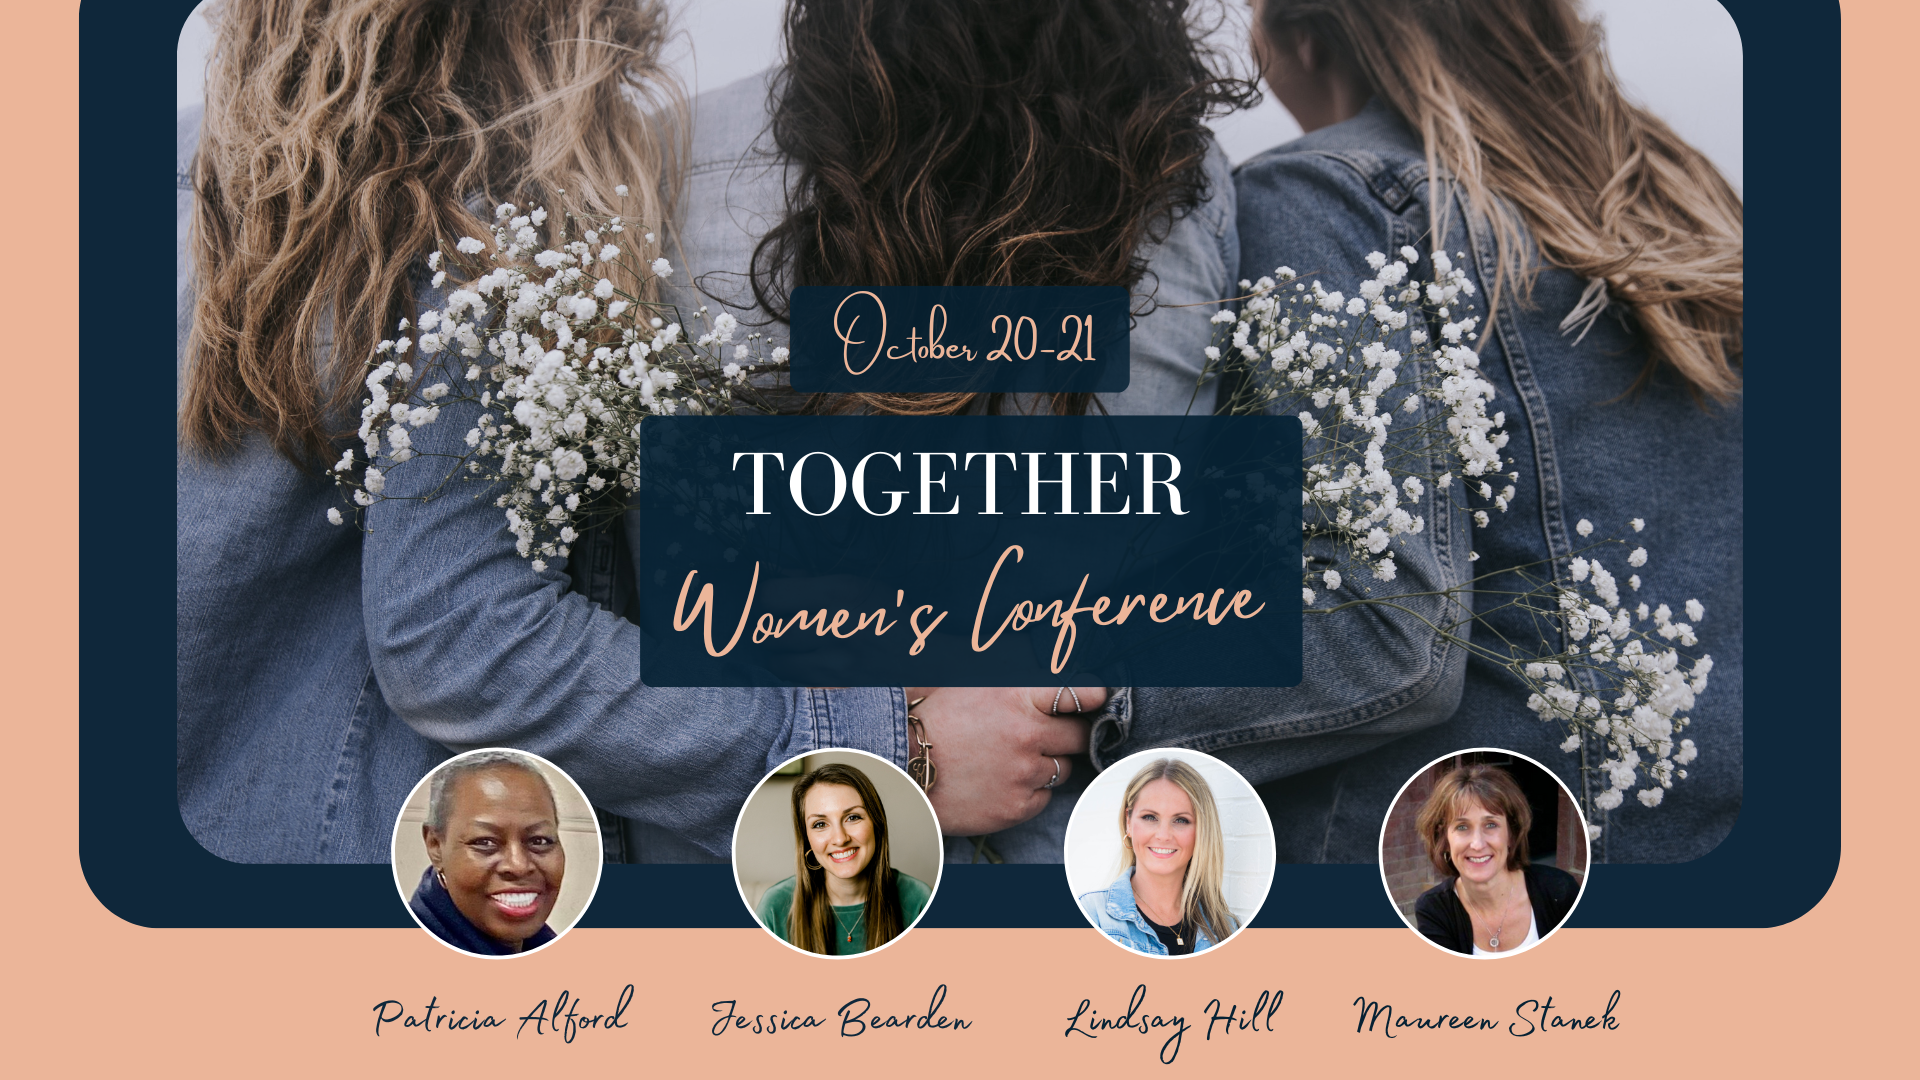 Together Women’s Conference